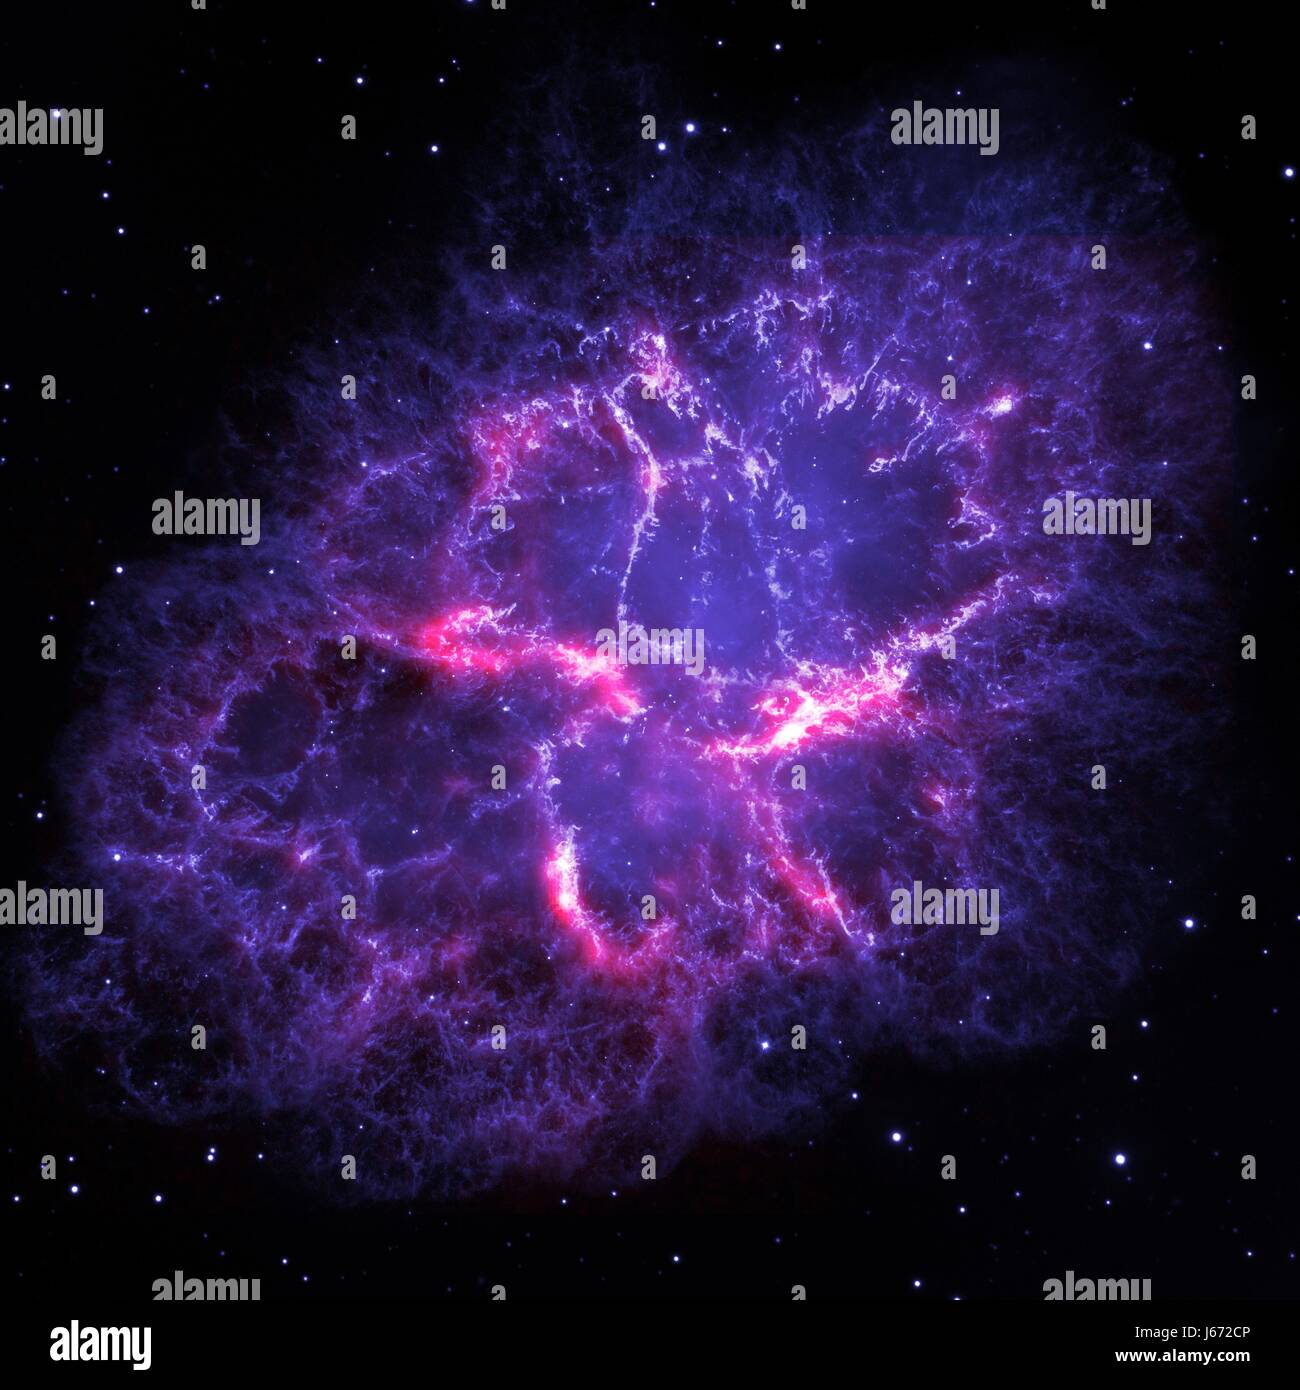 PICTURE SHOWS: This image shows a composite view of the Crab nebula, an iconic supernova remnant in our Milky Way galaxy, as viewed by the Herschel Space Observatory and the Hubble Space Telescope. (2013-12-12)  ...   Prepare to have your mind blown - NASA has collected together a treasure trove of more than 140,000 images, videos and audio files.  The stunning collection consolidates imagery spread across more than 60 collections into one searchable location, called the NASA Image and Video Library website.  Cover Images have chosen a gallery of the most popular images currently on the websit Stock Photo